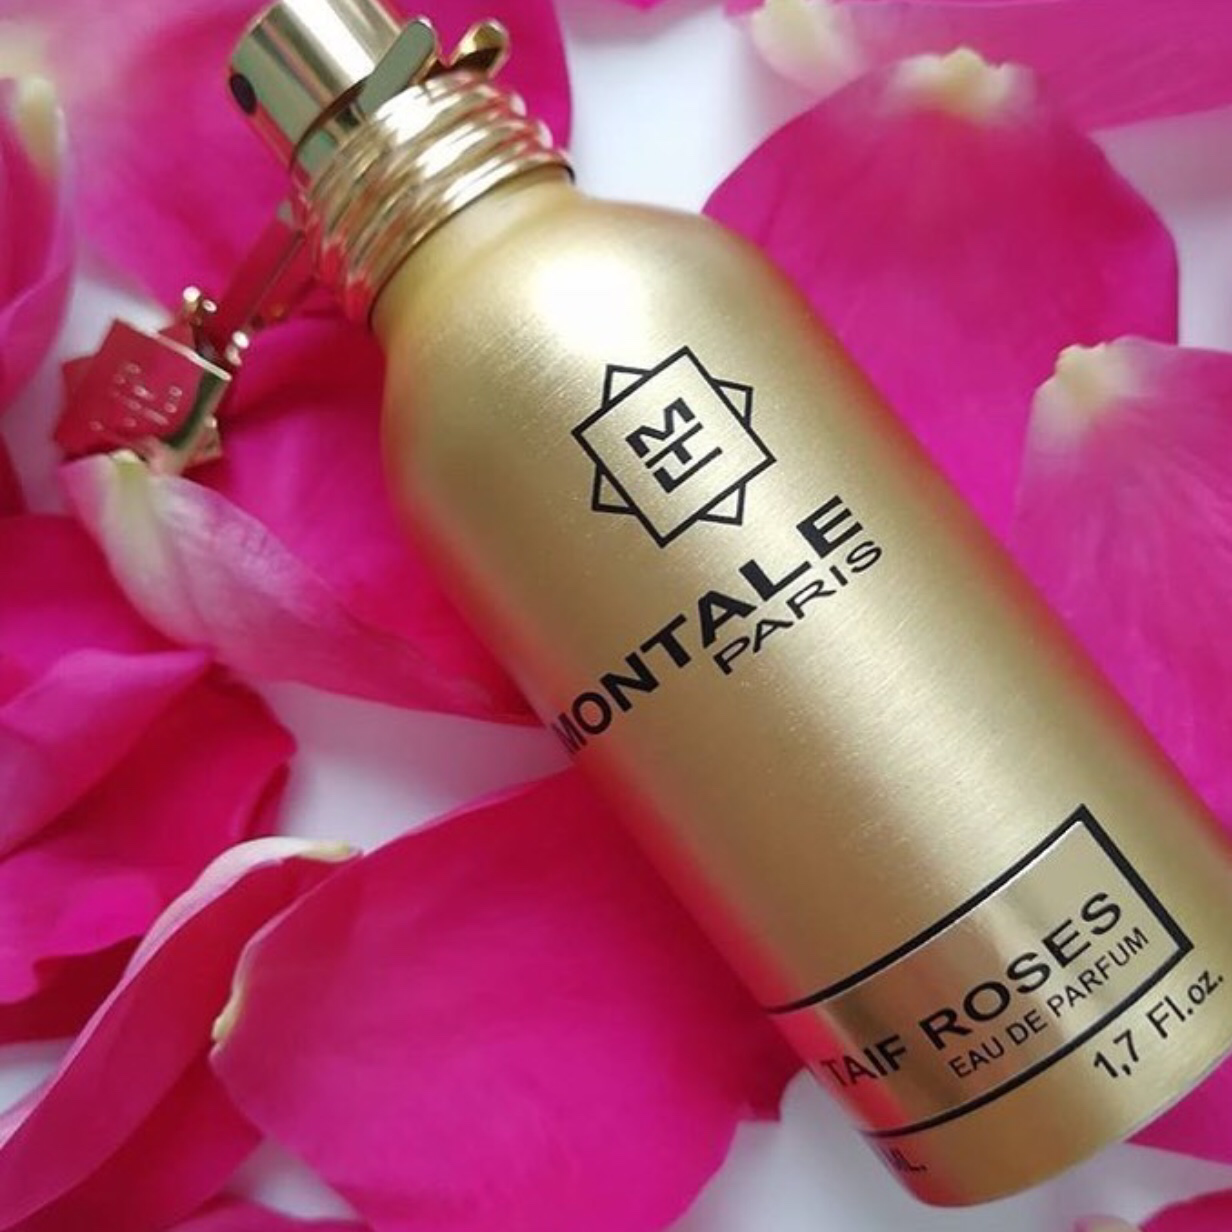 Montale - Taif Roses